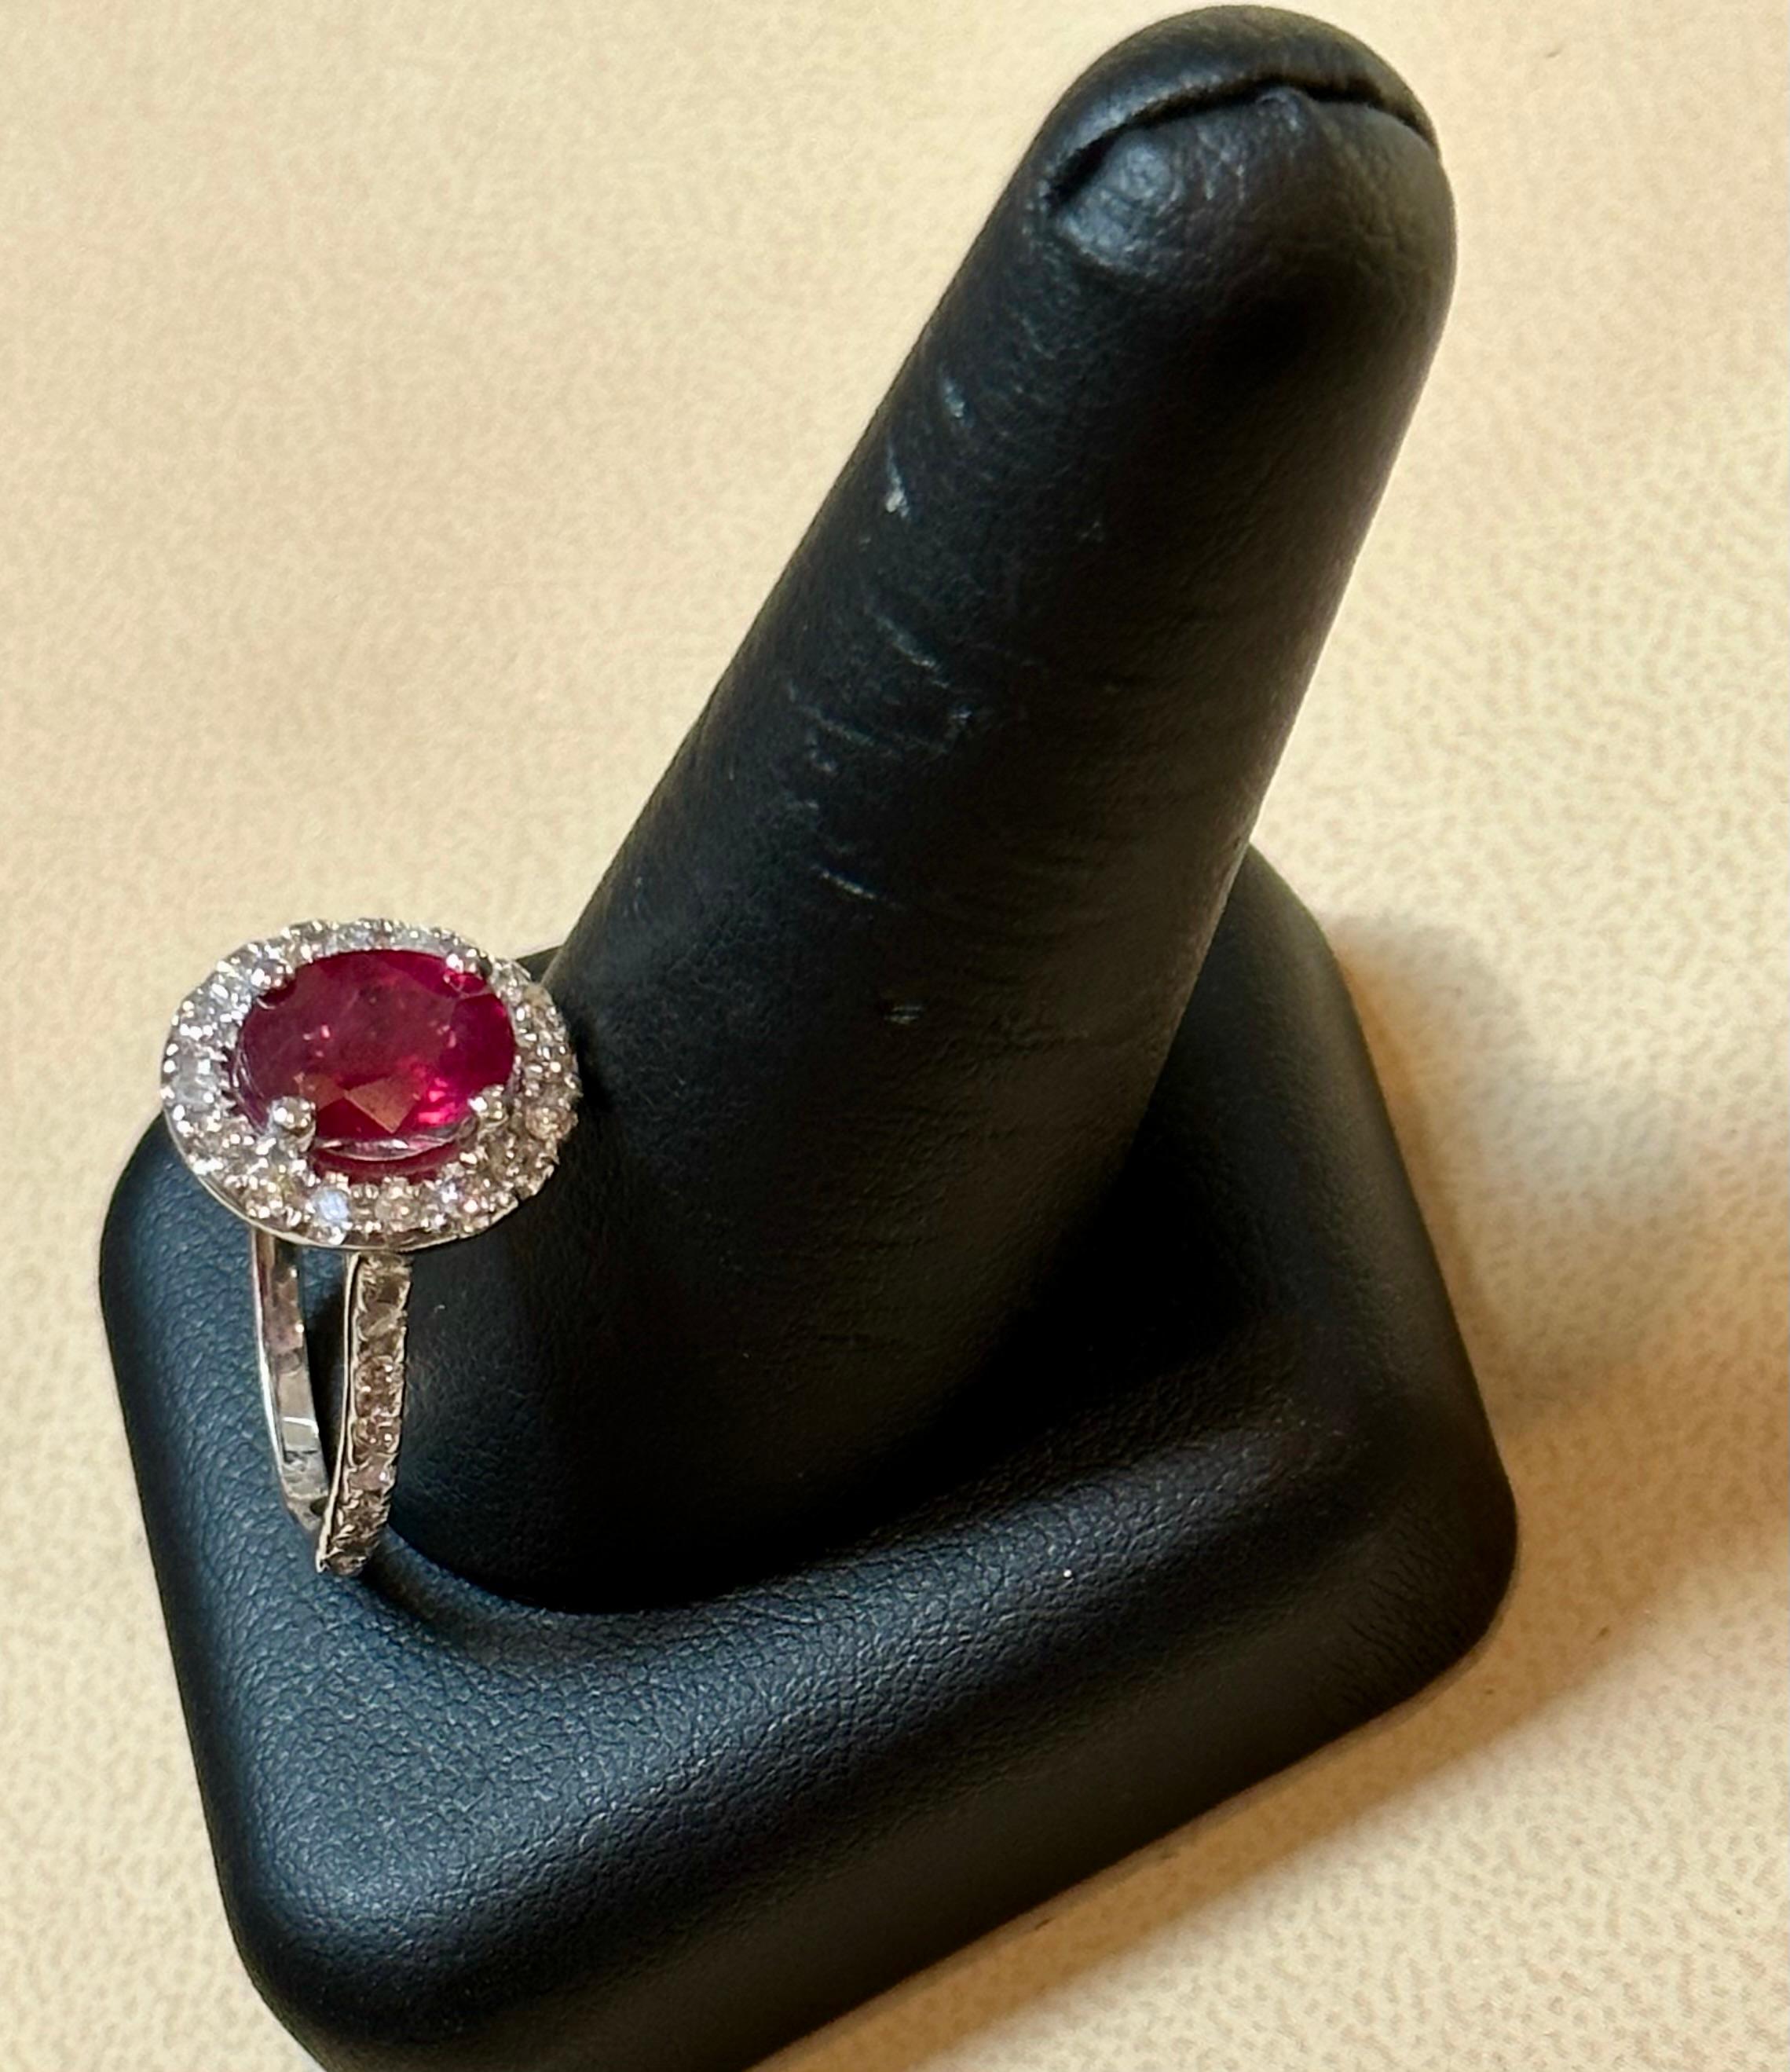 Women's 3 Carat Oval Treated Ruby & 1.25 ct Diamond Ring 14 Karat White Gold Size 6 For Sale